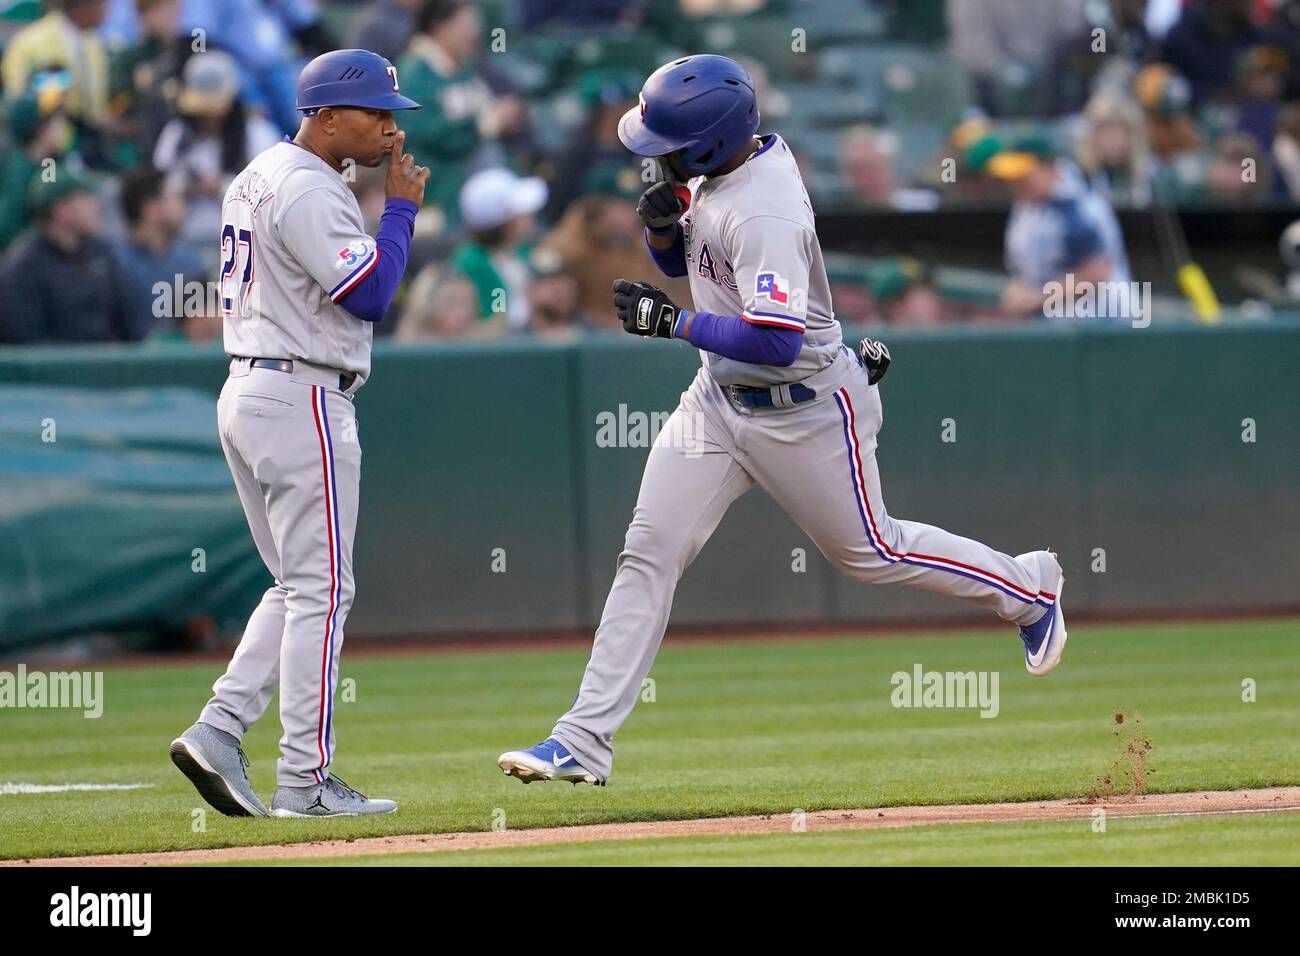 Texas Rangers' Andy Ibanez, right, is congratulated by third base coach  Tony Beasley after hitting a home run against the Oakland Athletics a  baseball game in Oakland, Calif., Friday, April 22, 2022. (